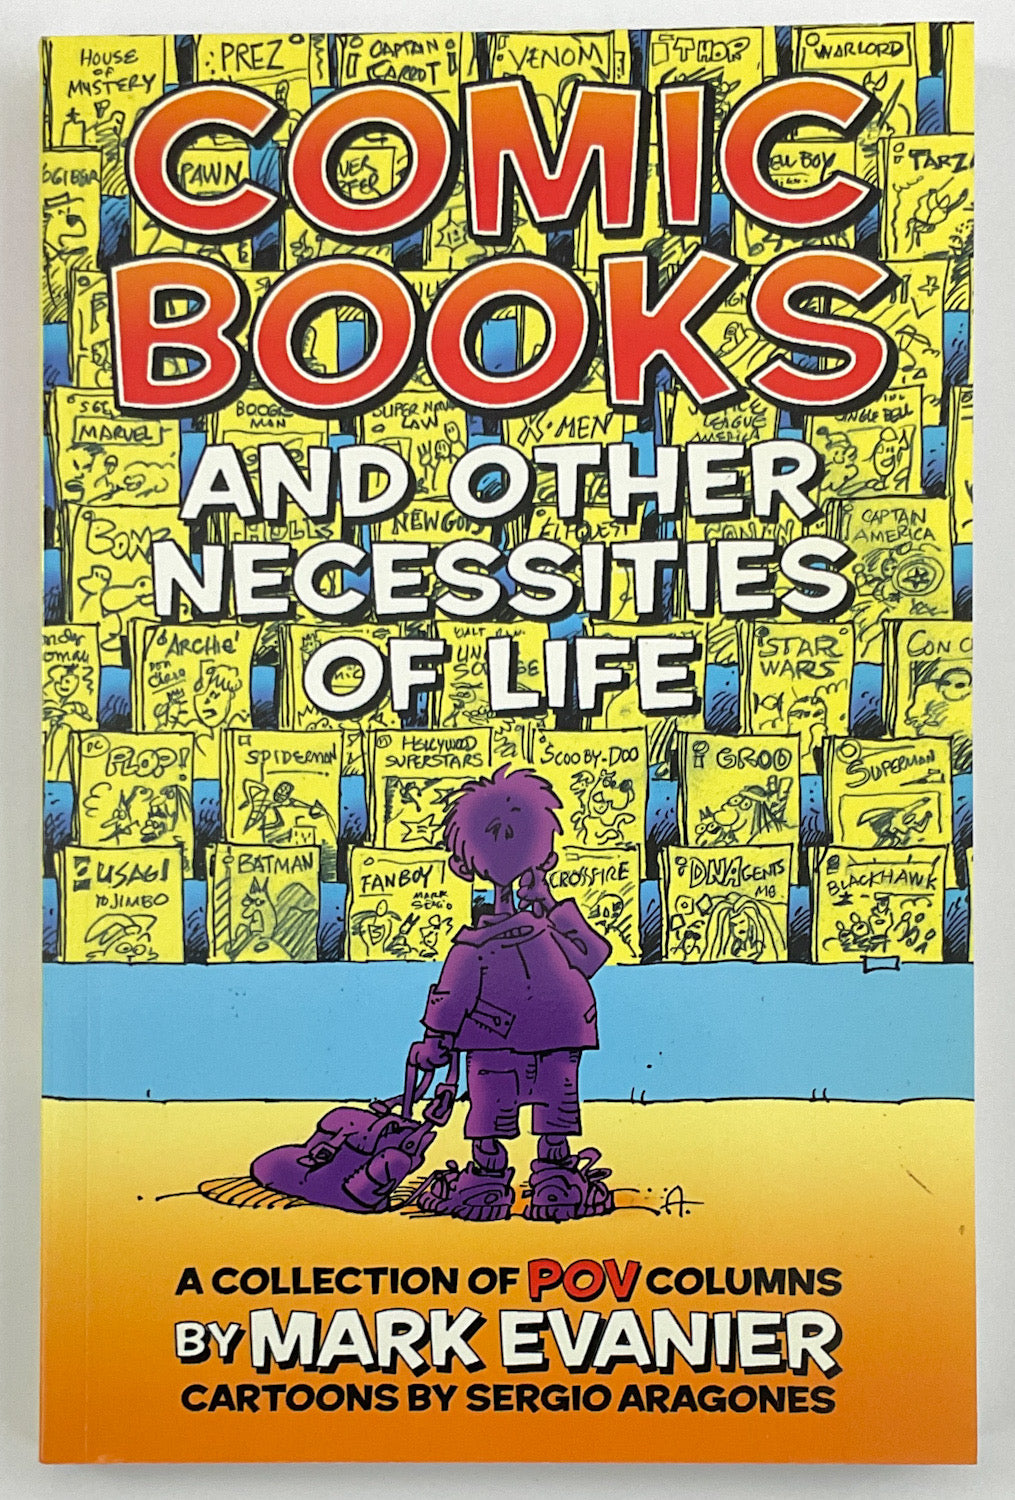 Comic Books and Other Necessities of Life: A Collection Of POV Columns